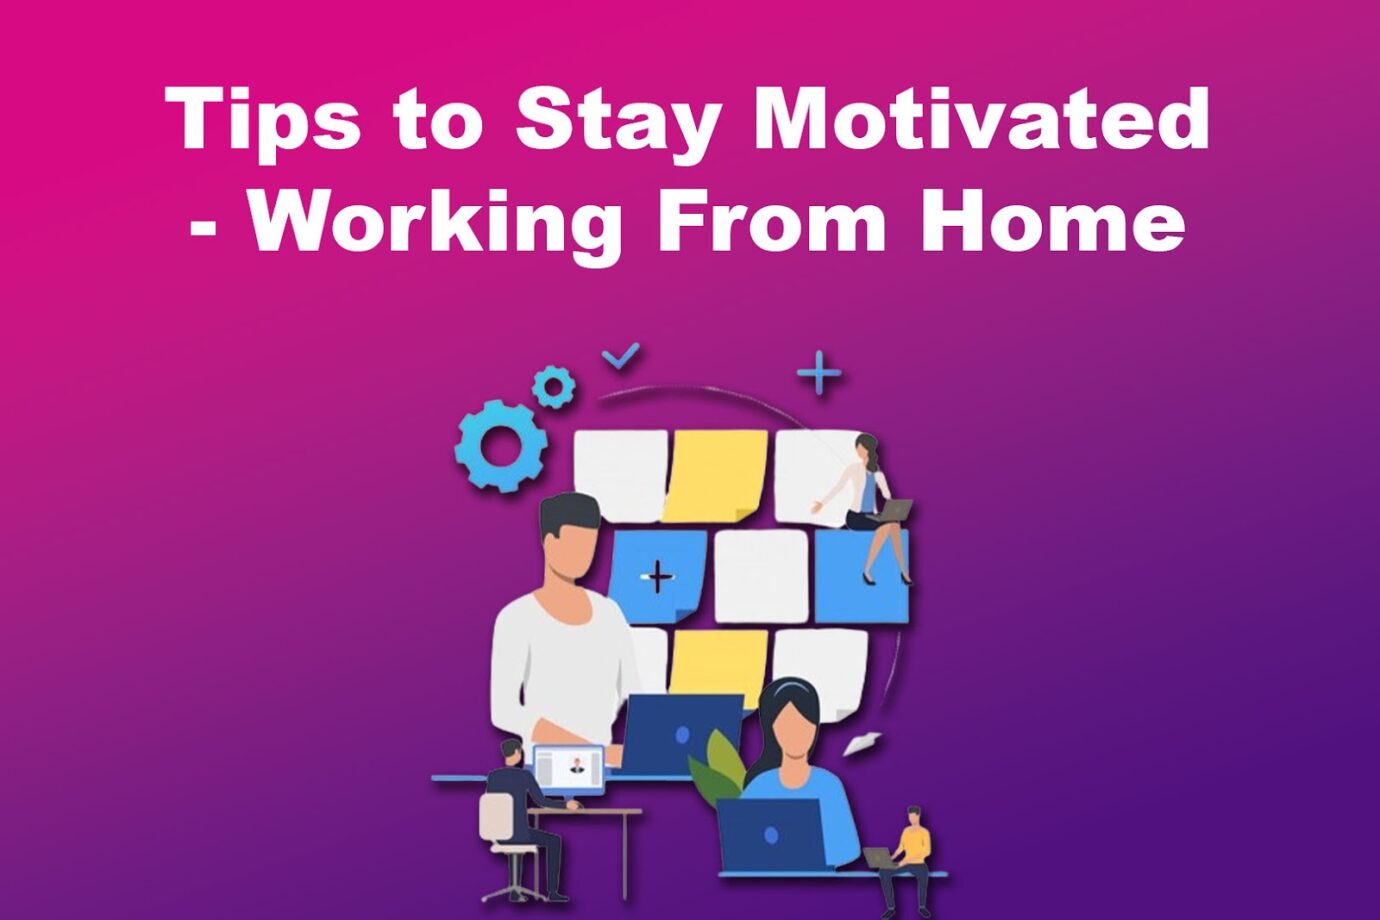 How to Stay Motivated Working From Home - Tips